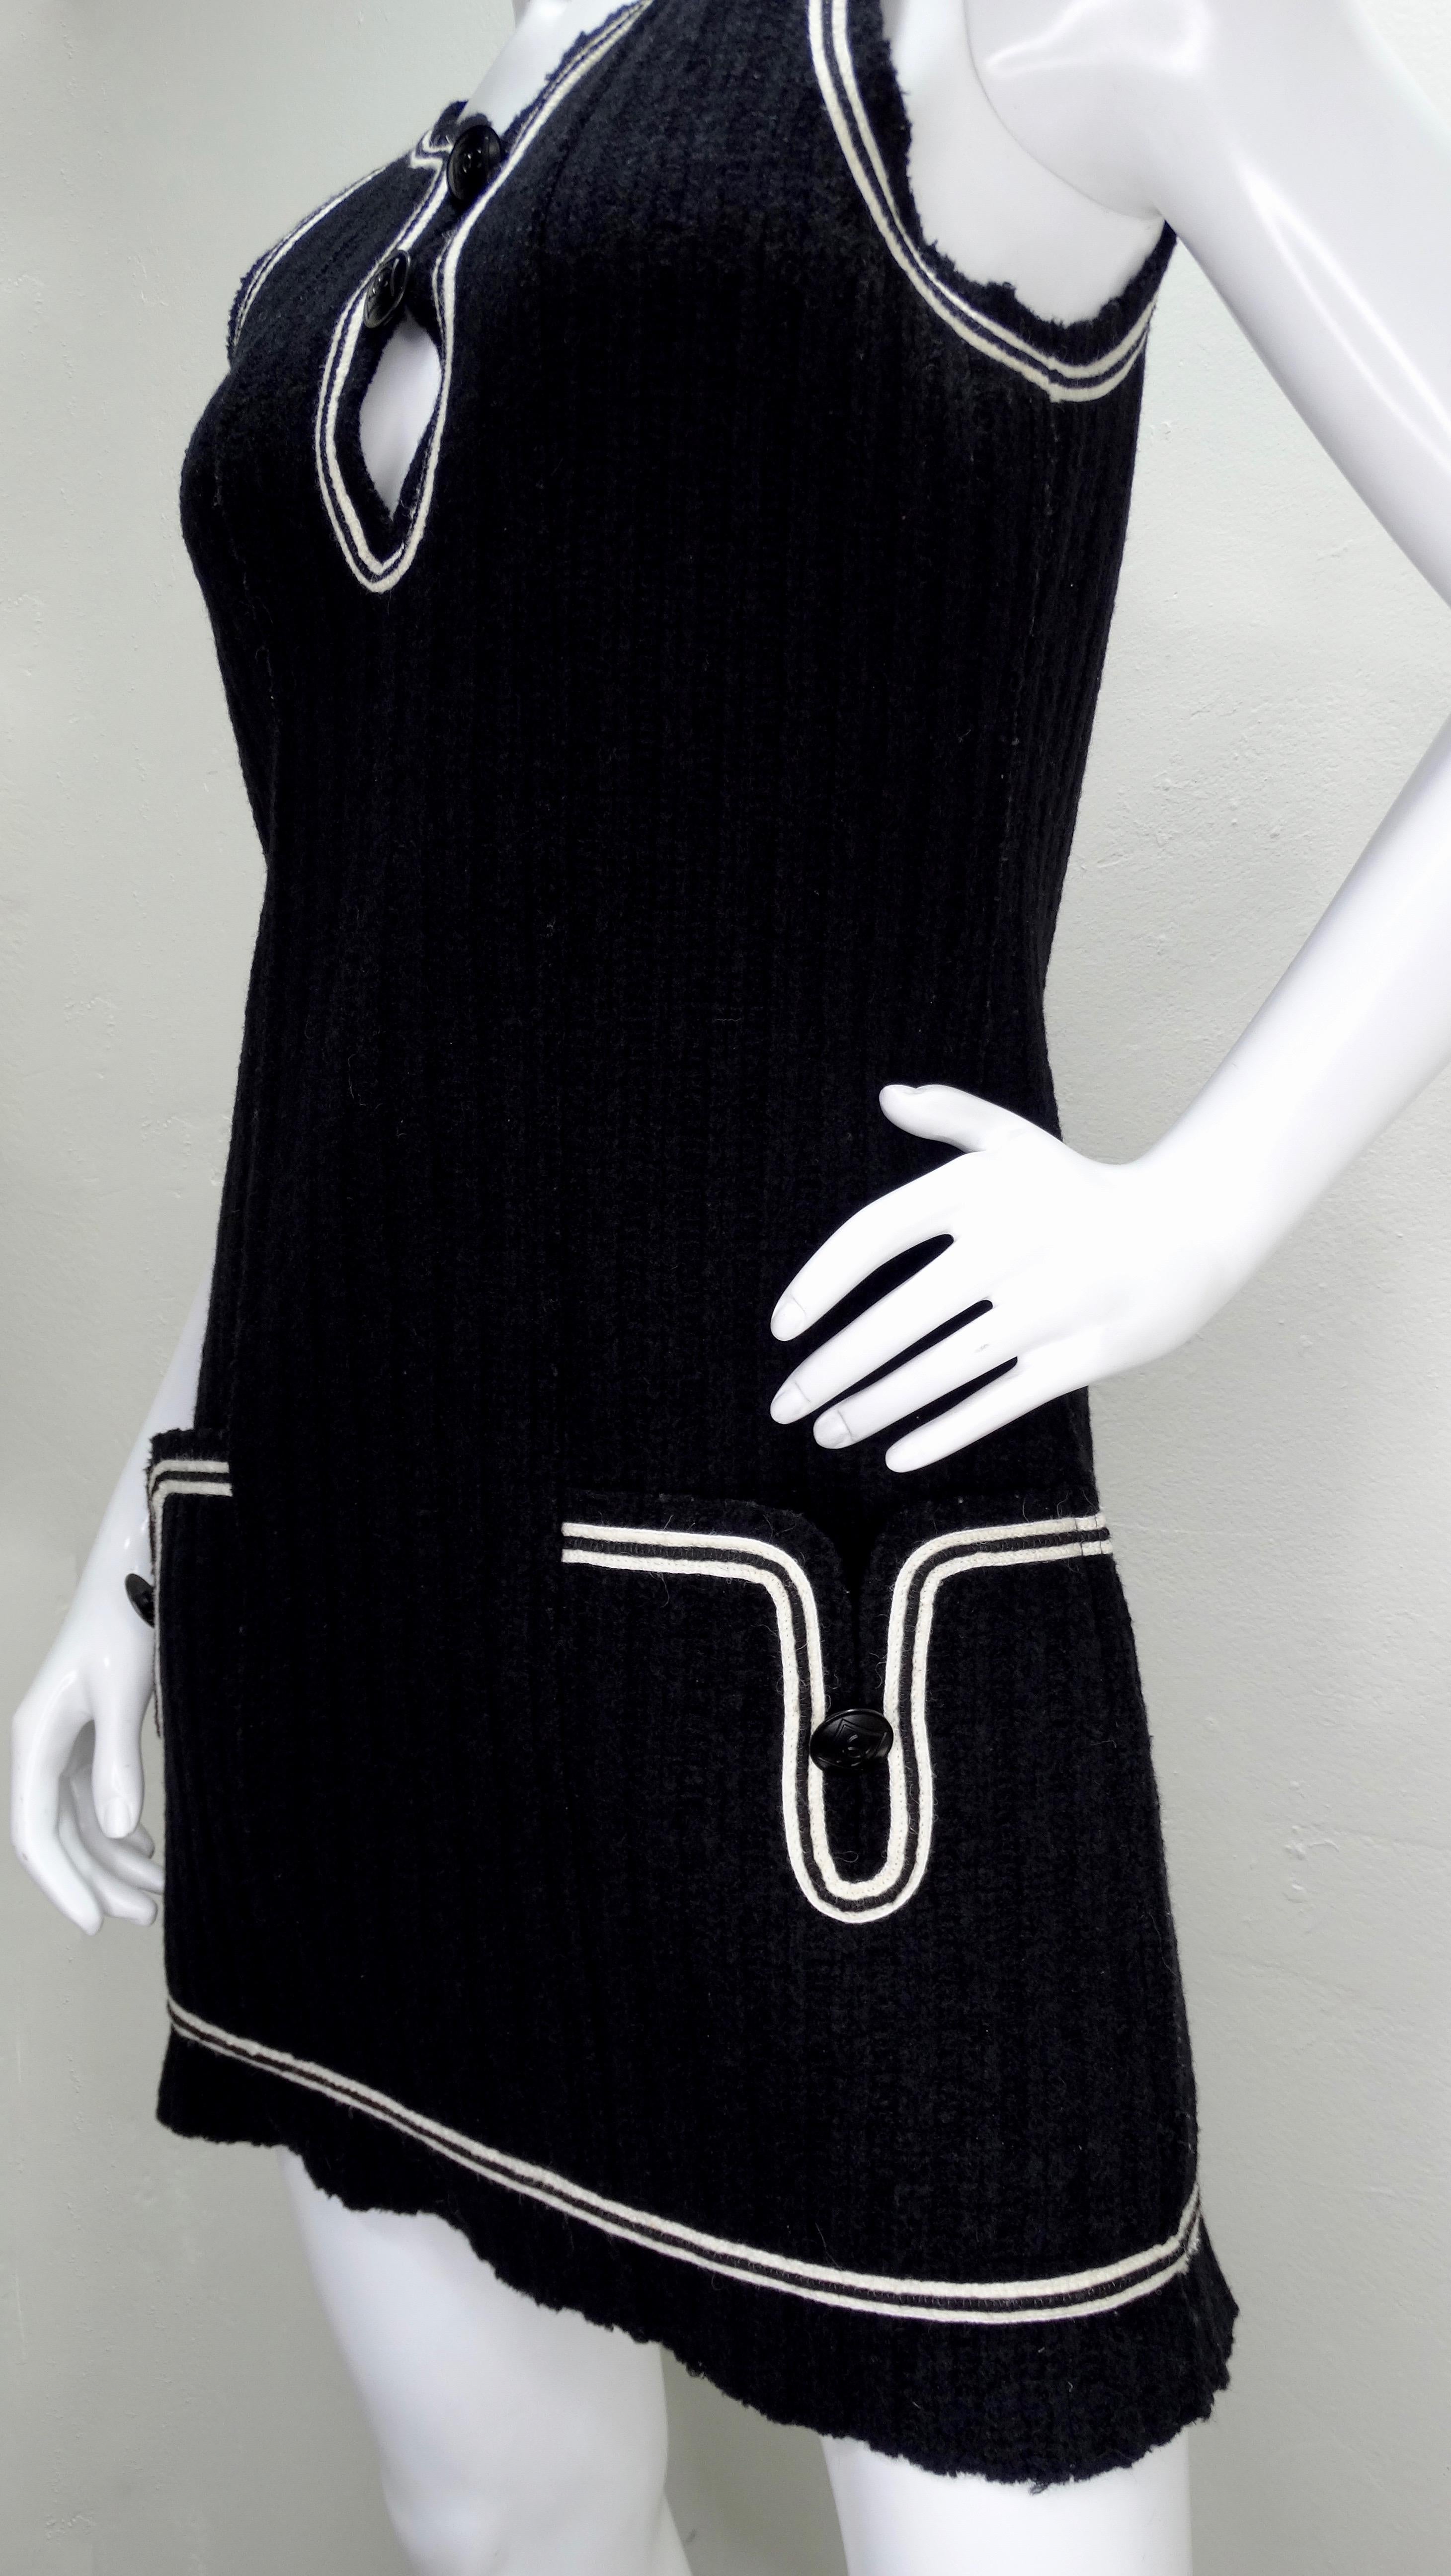 For all the Chanel lovers! Circa 2007 from their Fall/Winter Sport collection, this mini dress brings back the 90s Chanel Sport aesthetic and features black wool with white pipping, a deep v-neck, two front pockets, and large matte black CC embossed